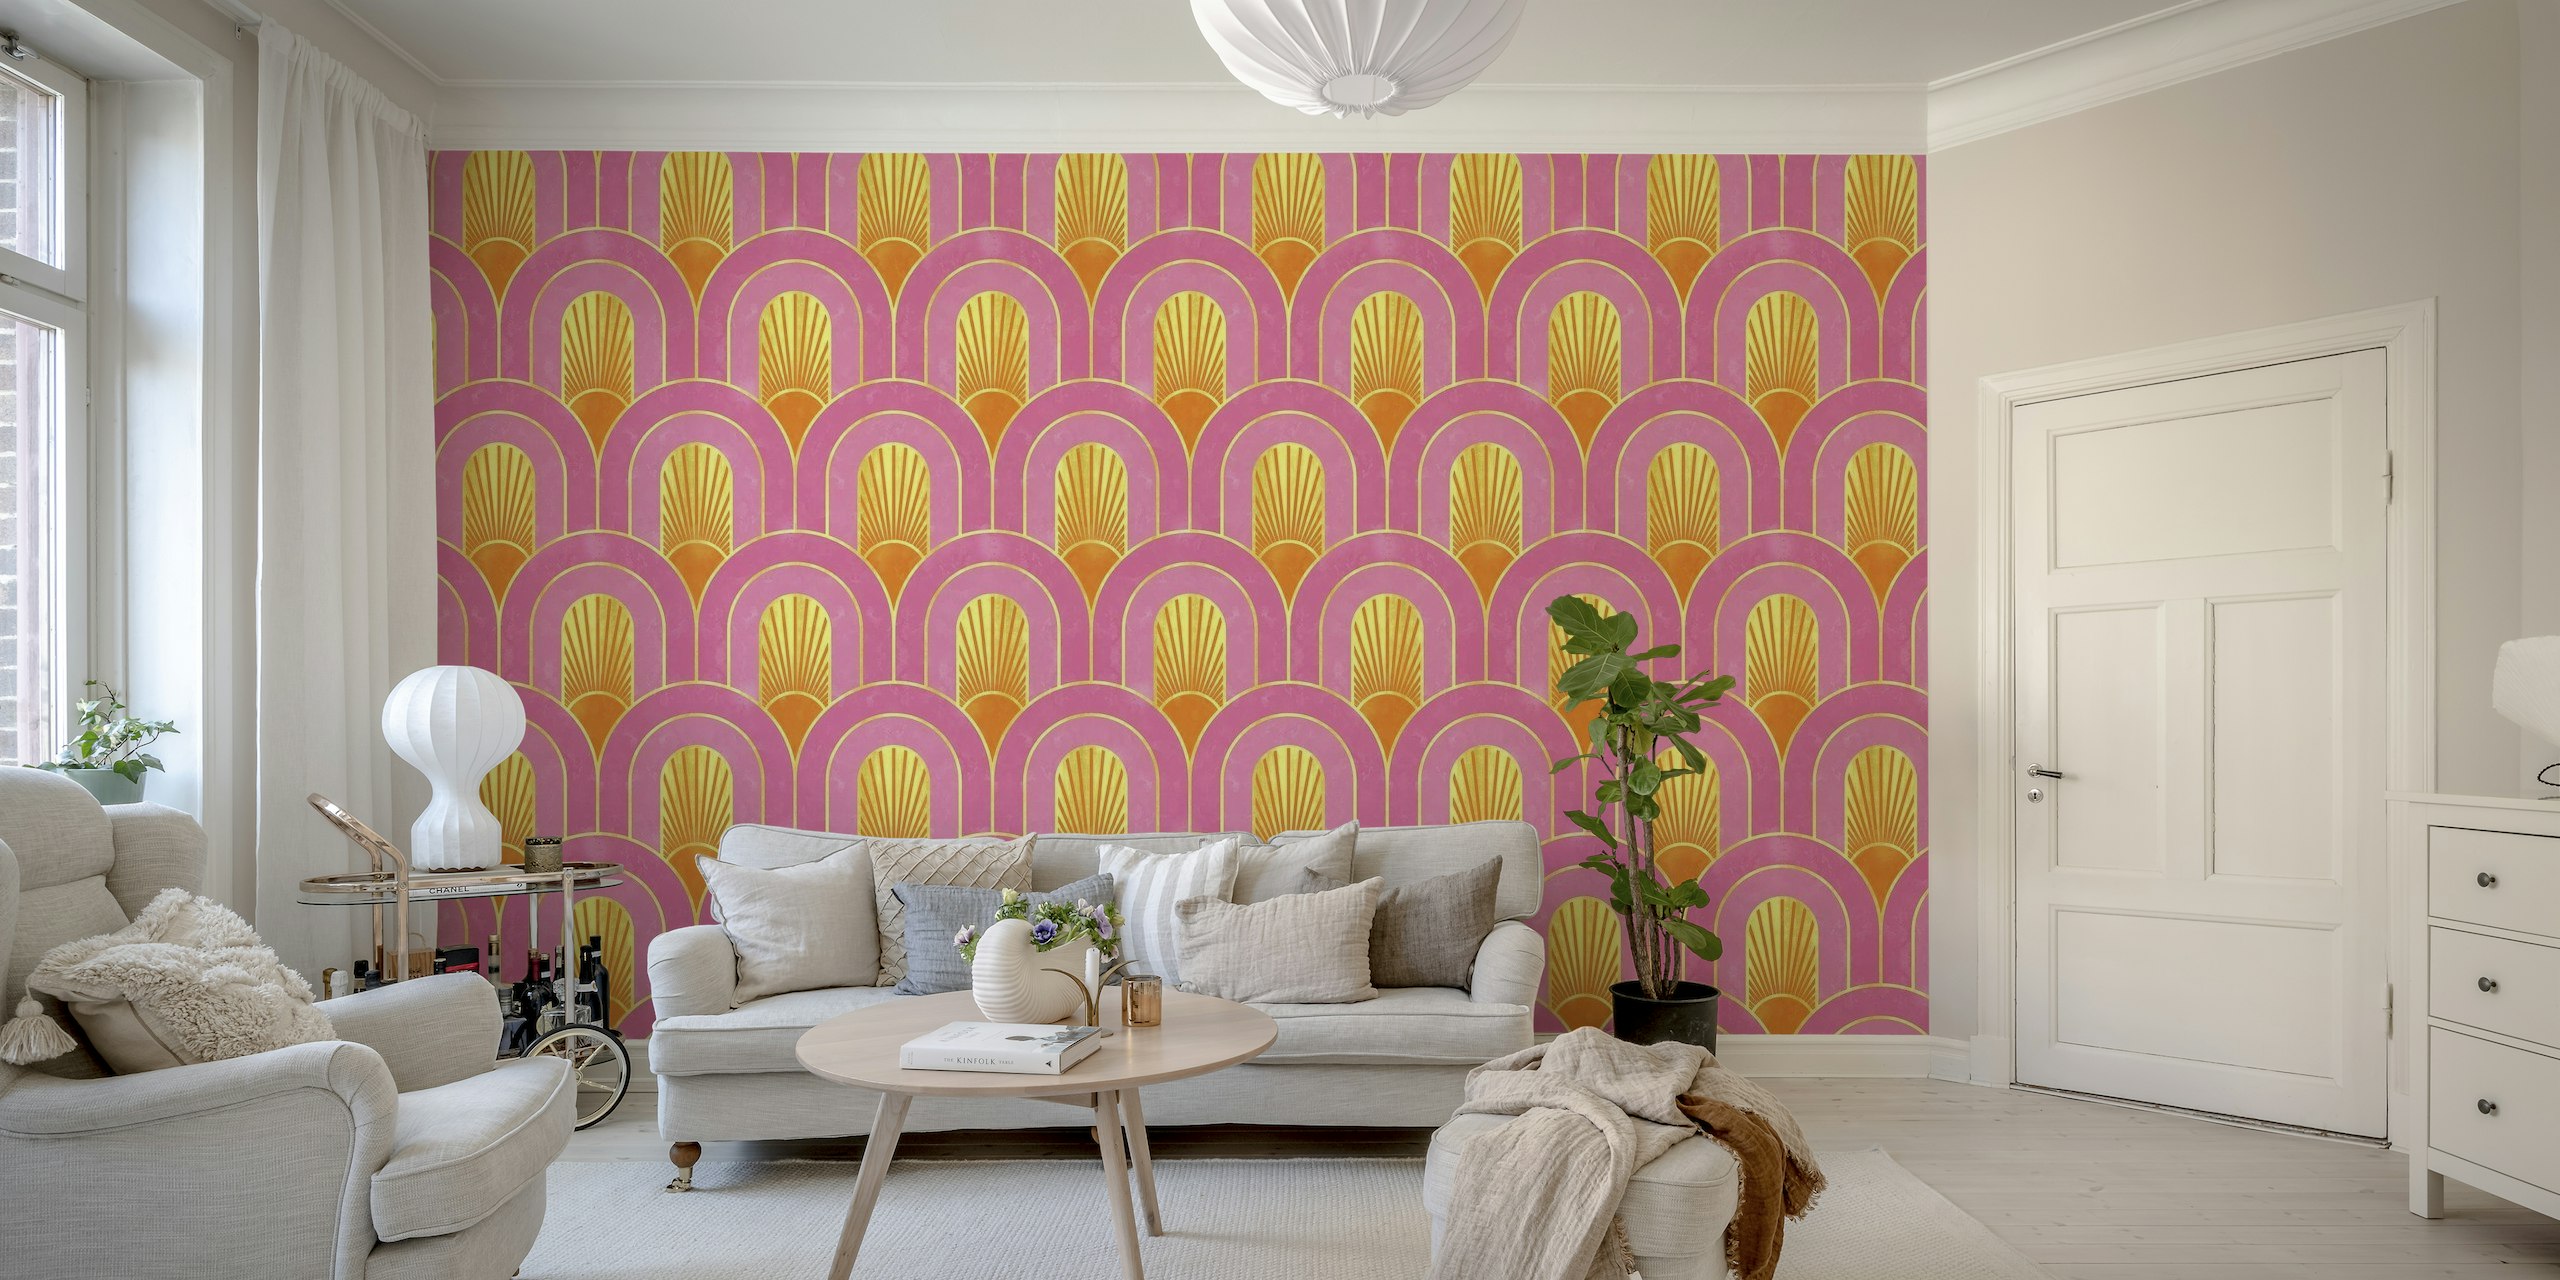 Artistic wall mural with retro arch pattern in pink, orange, and gold colors.